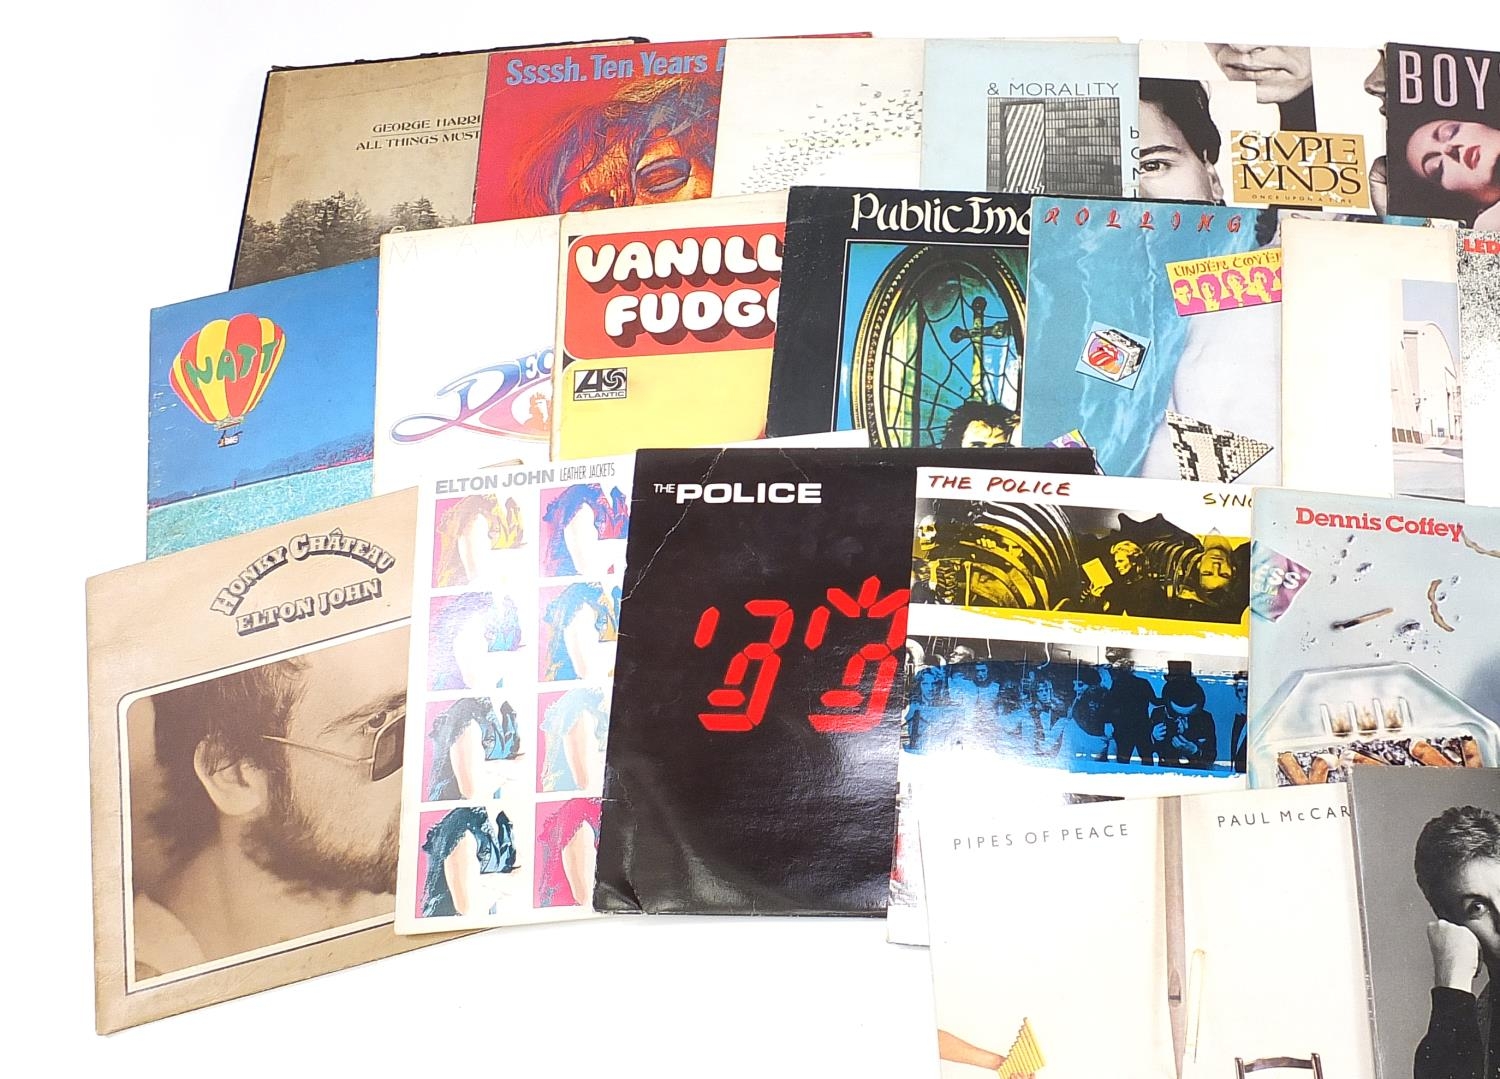 Vinyl LP records including Led Zeppelin, Genesis, Queen, The Beatles and David Bowie - Image 2 of 4